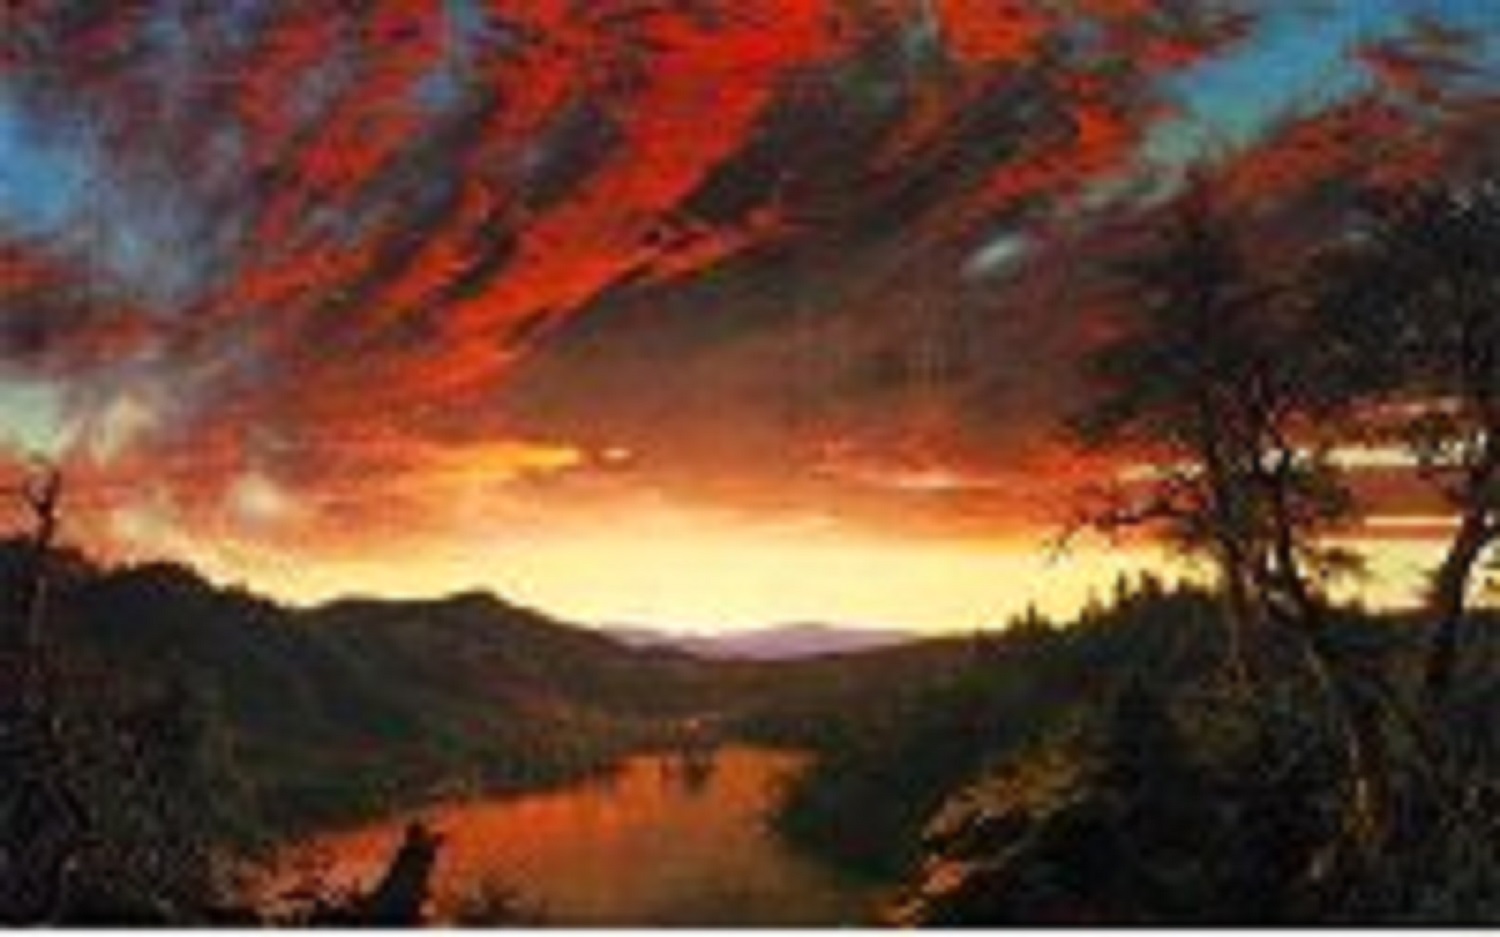 Frederick Edwin Church. "Twilight in the Wilderness", 40"x64",1860, oil, The Cleveland Museum of Art. From: Frederick Edwin Church & the National Landscape.